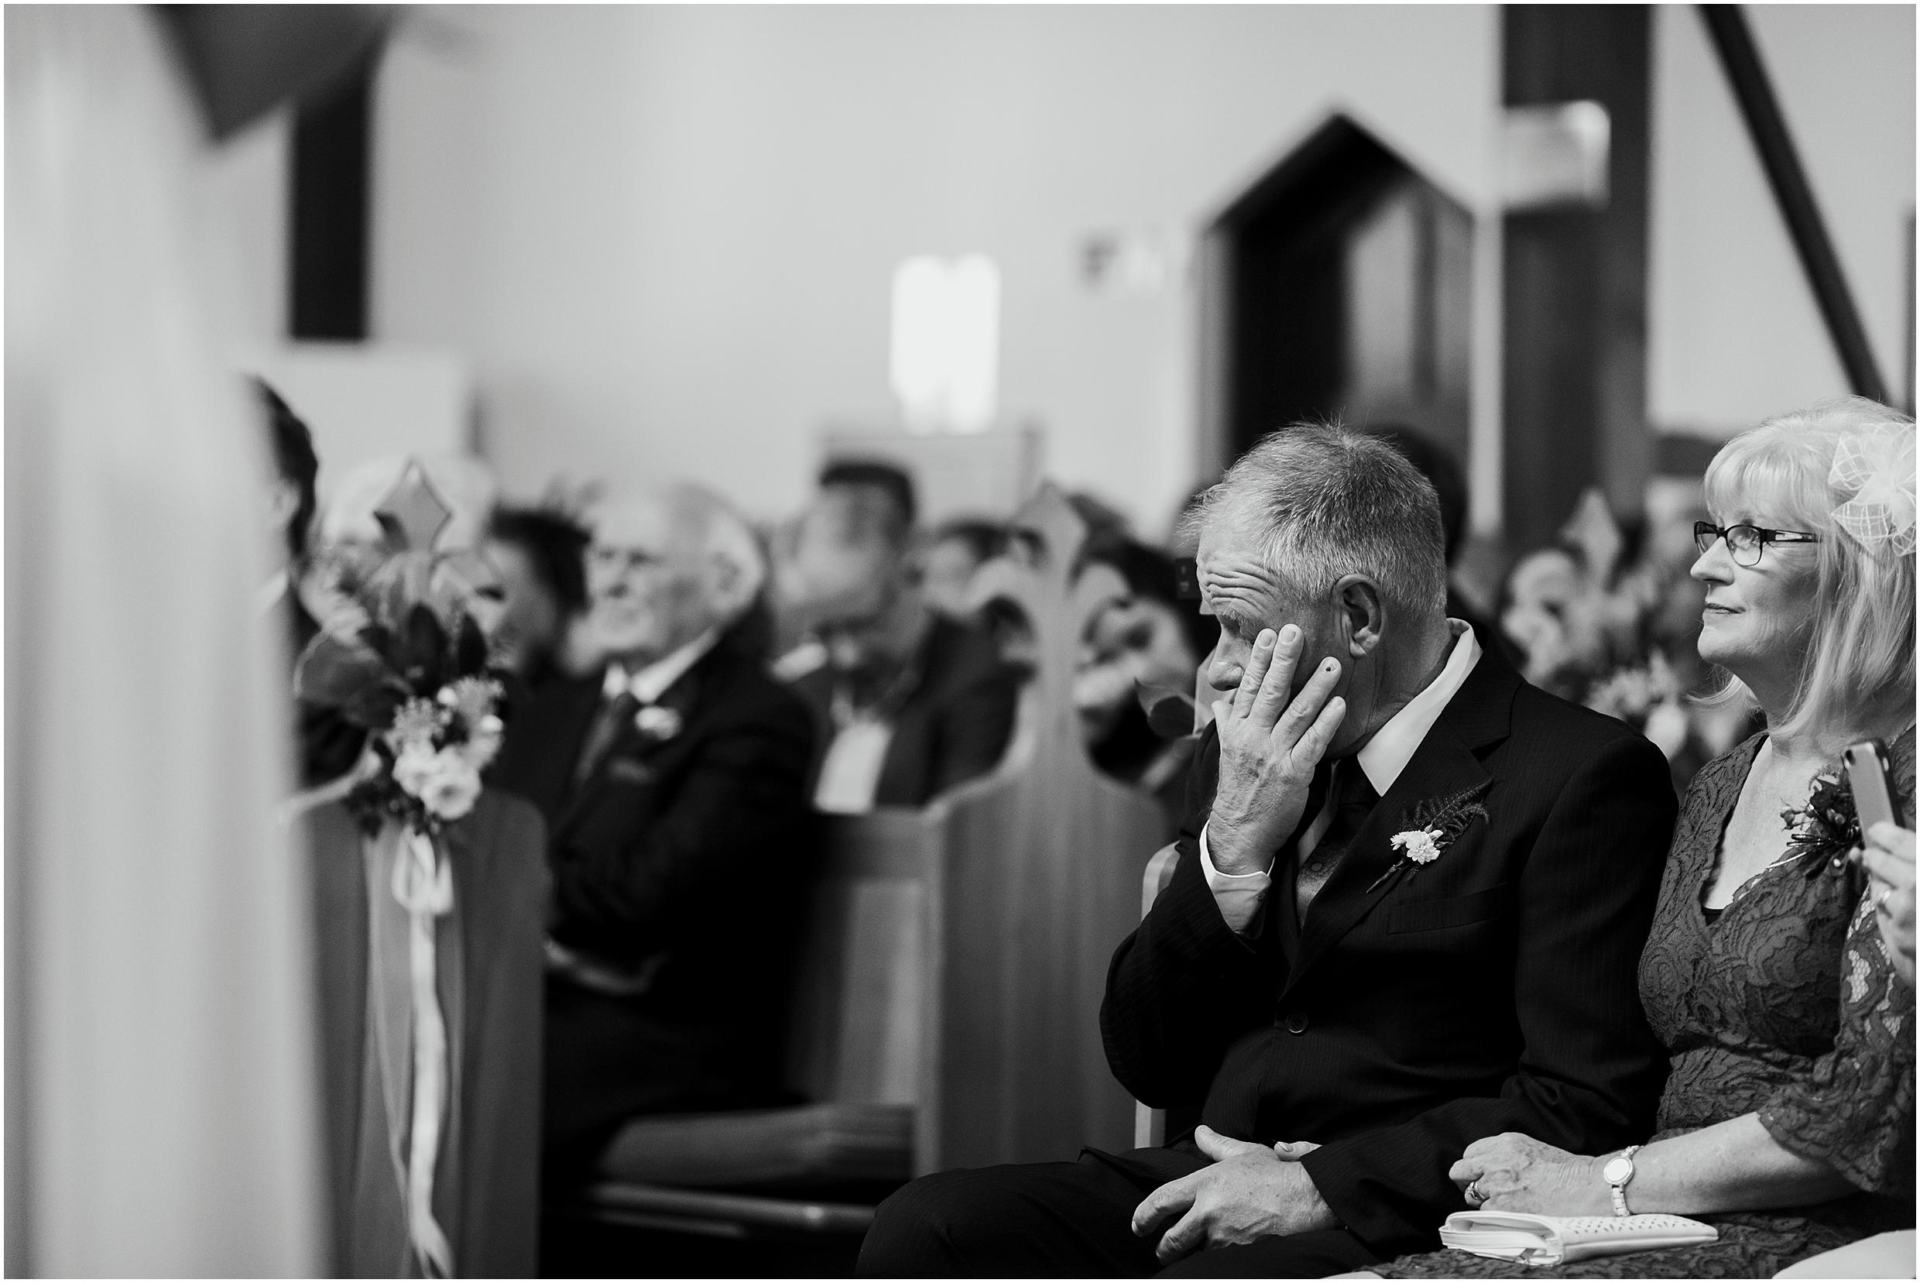 Charlotte Kiri Photography - Wedding Photography black and white photo of a member of the bridal party shedding a tear in the church at the wedding during the nuptials at Palmer Estate, Nelson.